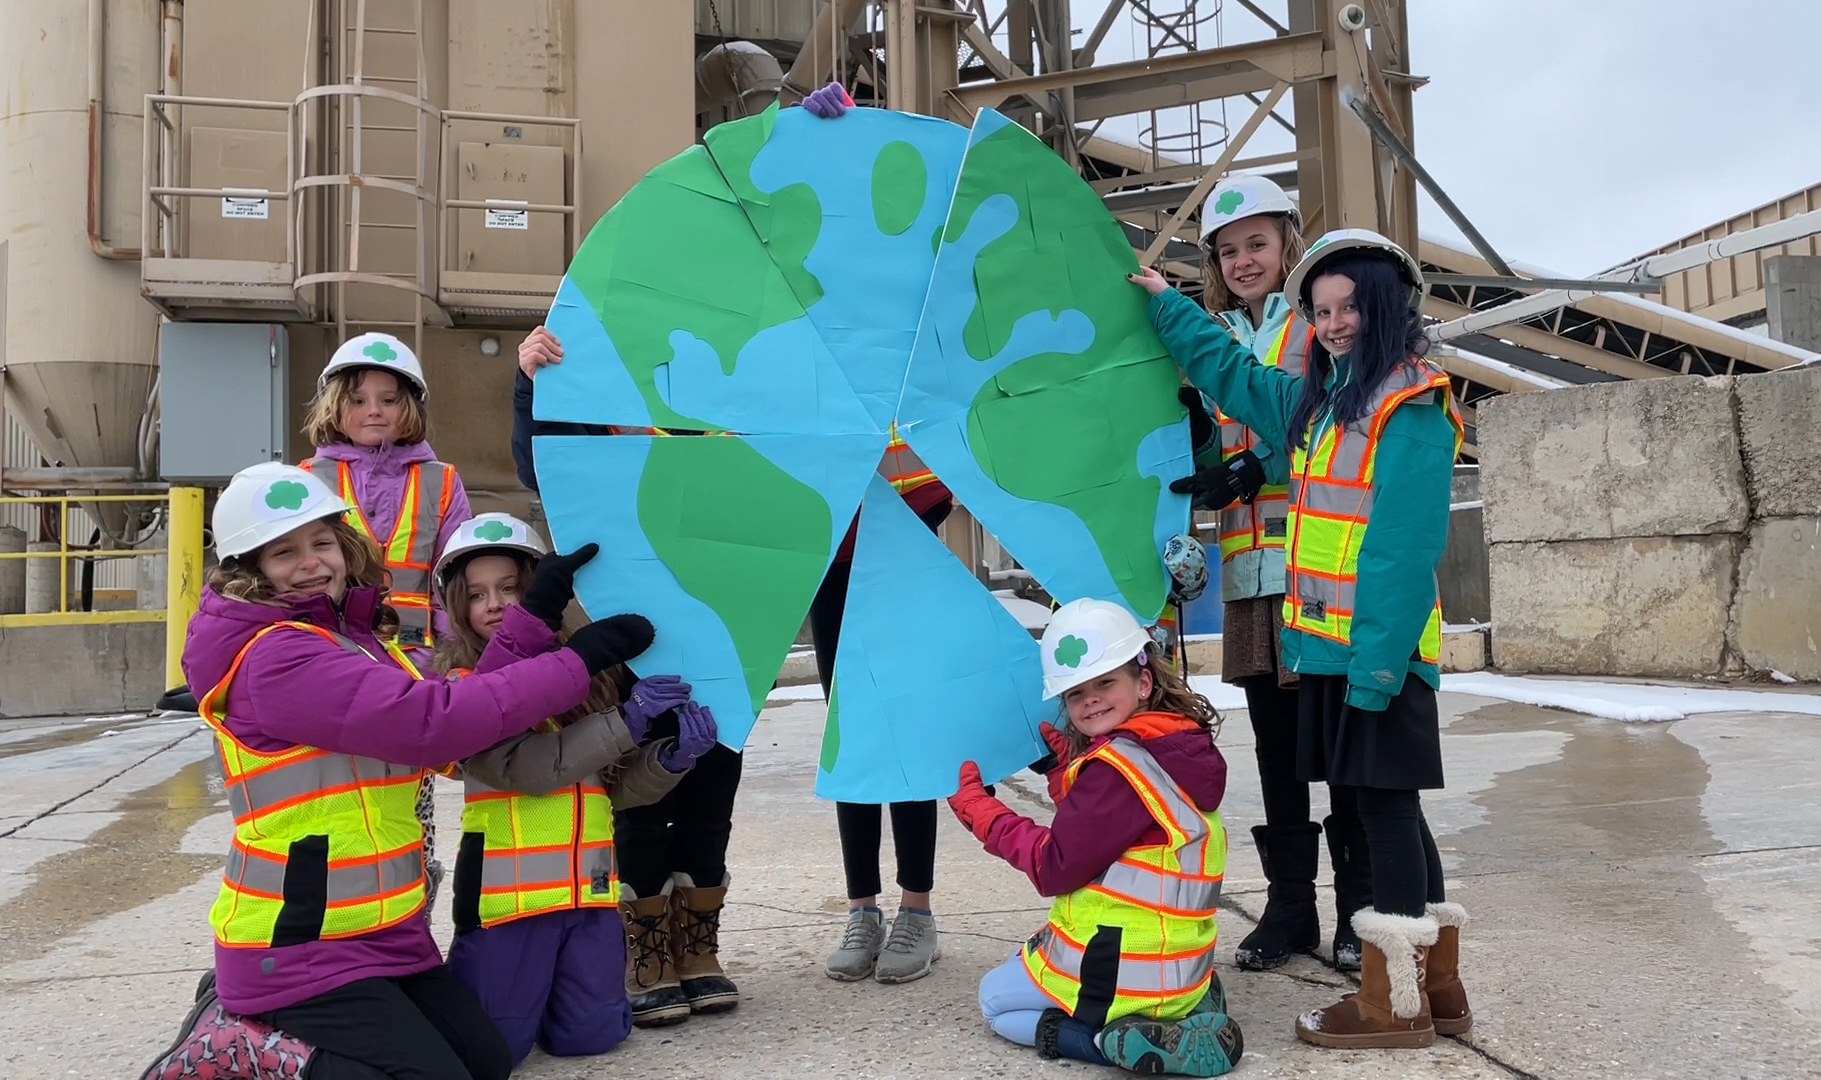 girls wearing hardhats holding wedges of a circle together to form a globe